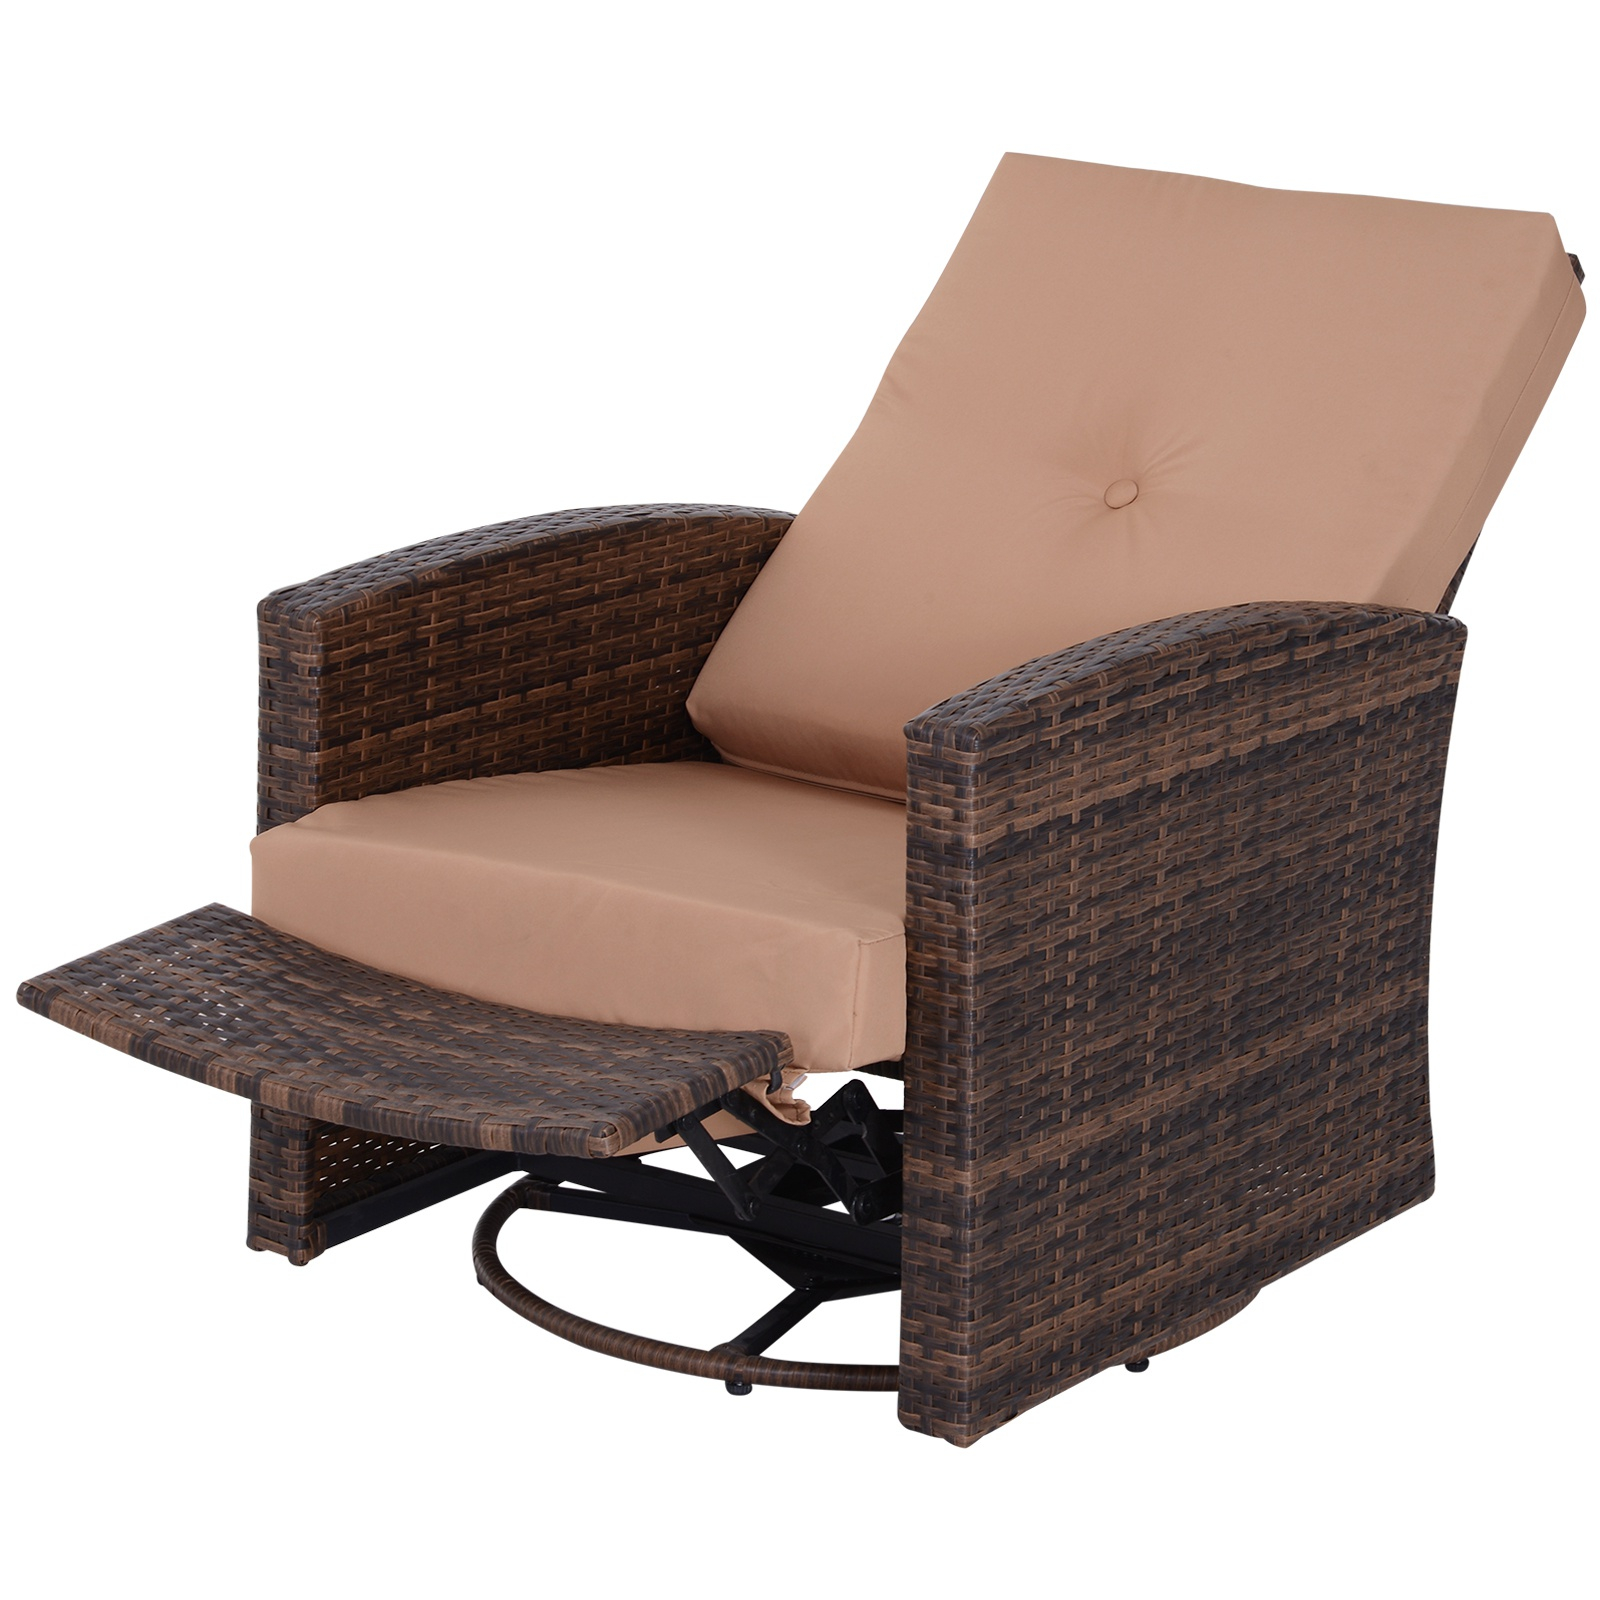 Swivel Recliner Patio Chairs • Fence Ideas Site